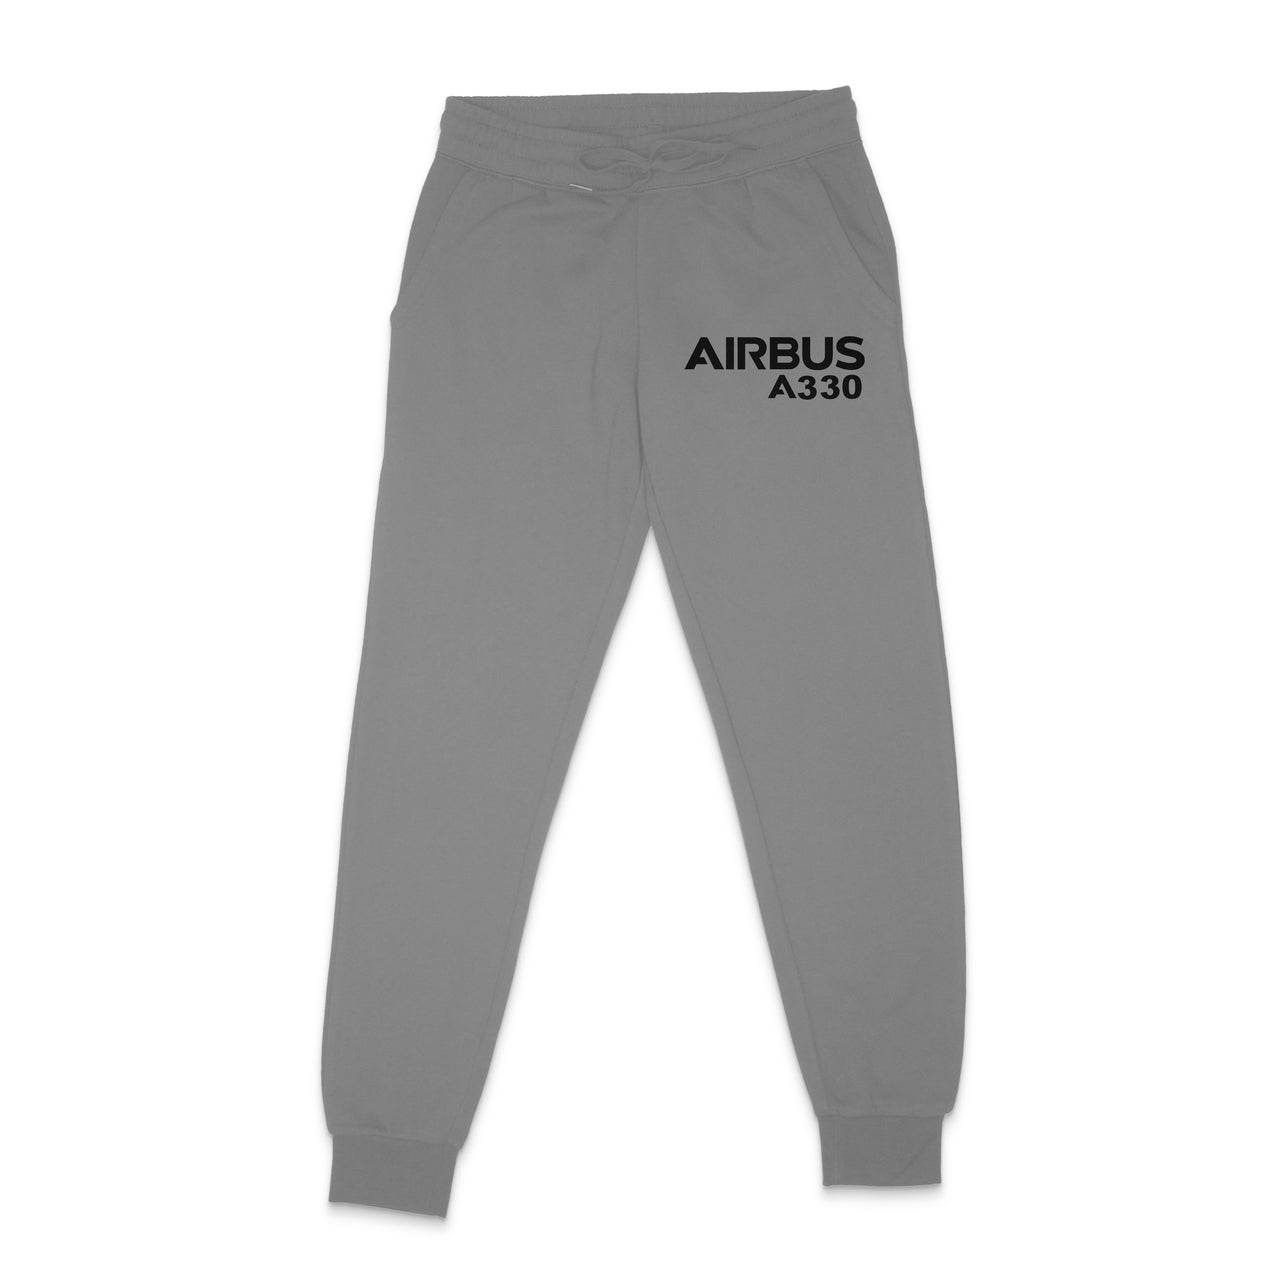 Airbus A330 & Text Designed Sweatpants